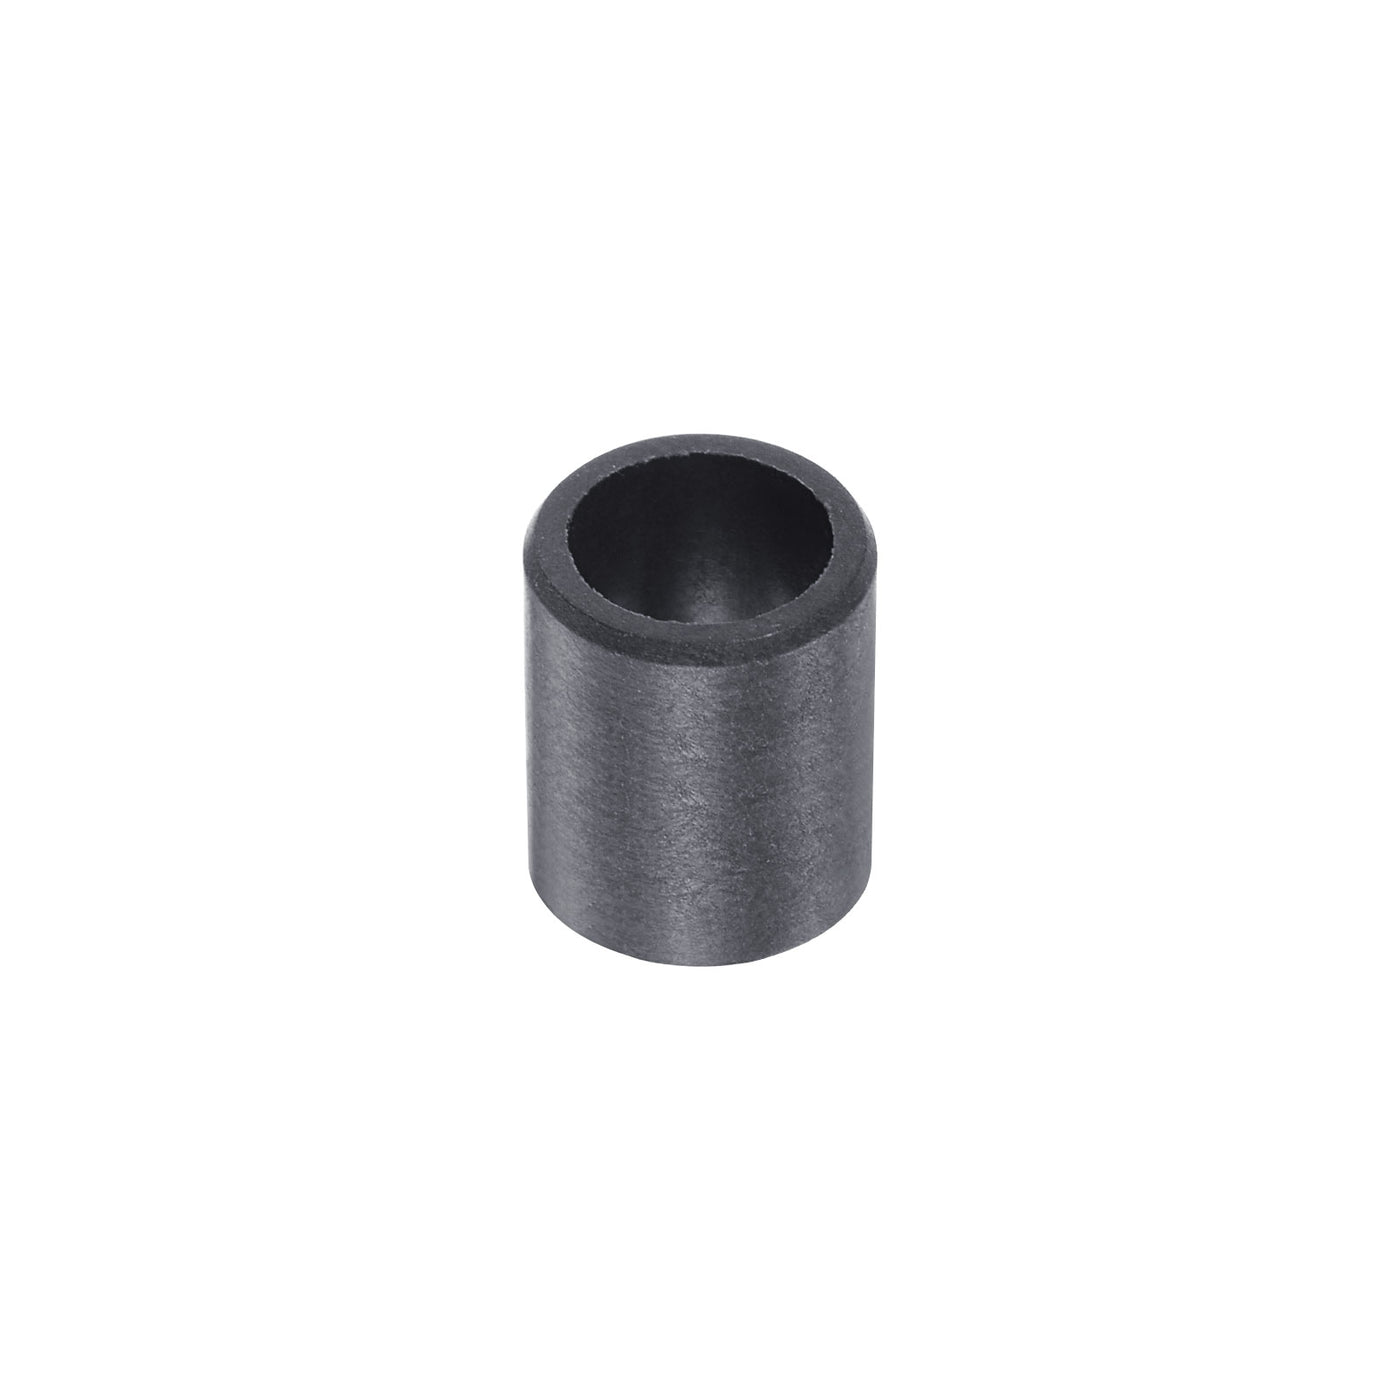 uxcell Uxcell Sleeve Bearings 6mmx8mmx10mm POM Wrapped Oilless Bushings Black